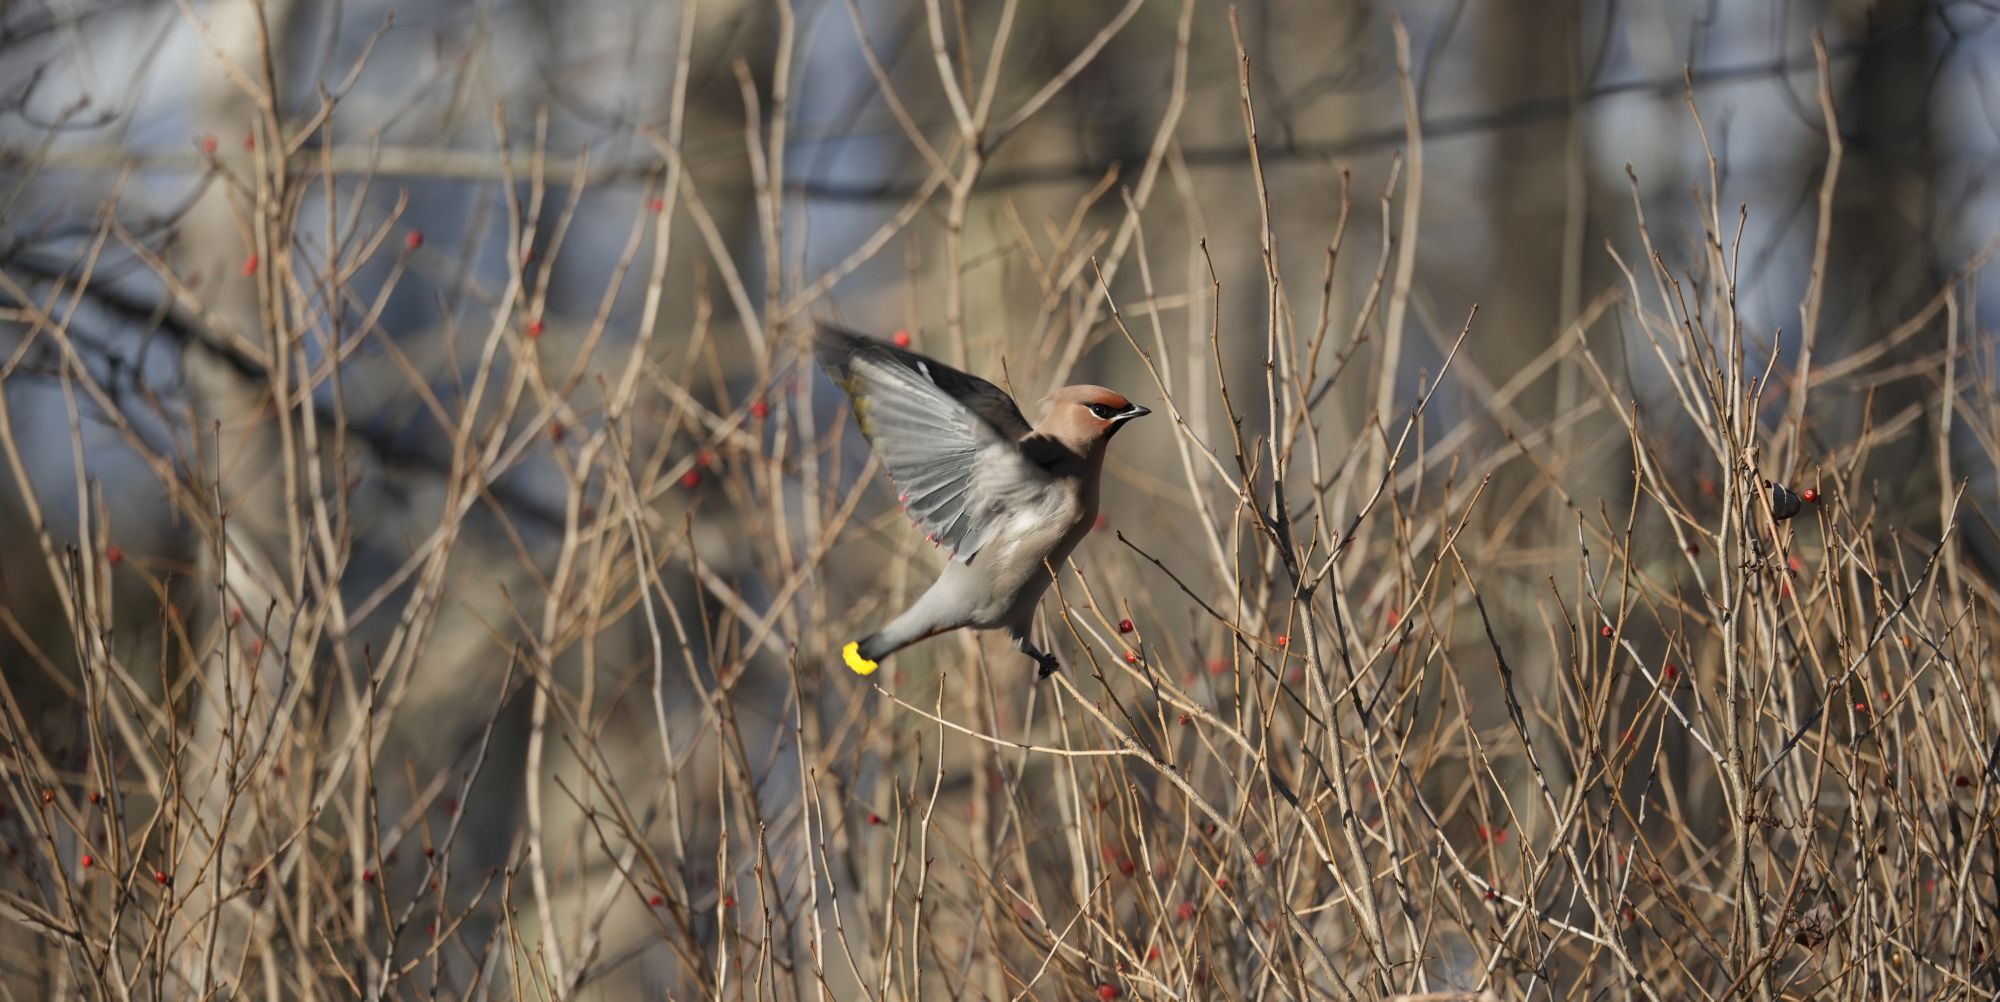 Bohemian Waxwing in dry grass with wings open while flitting around.